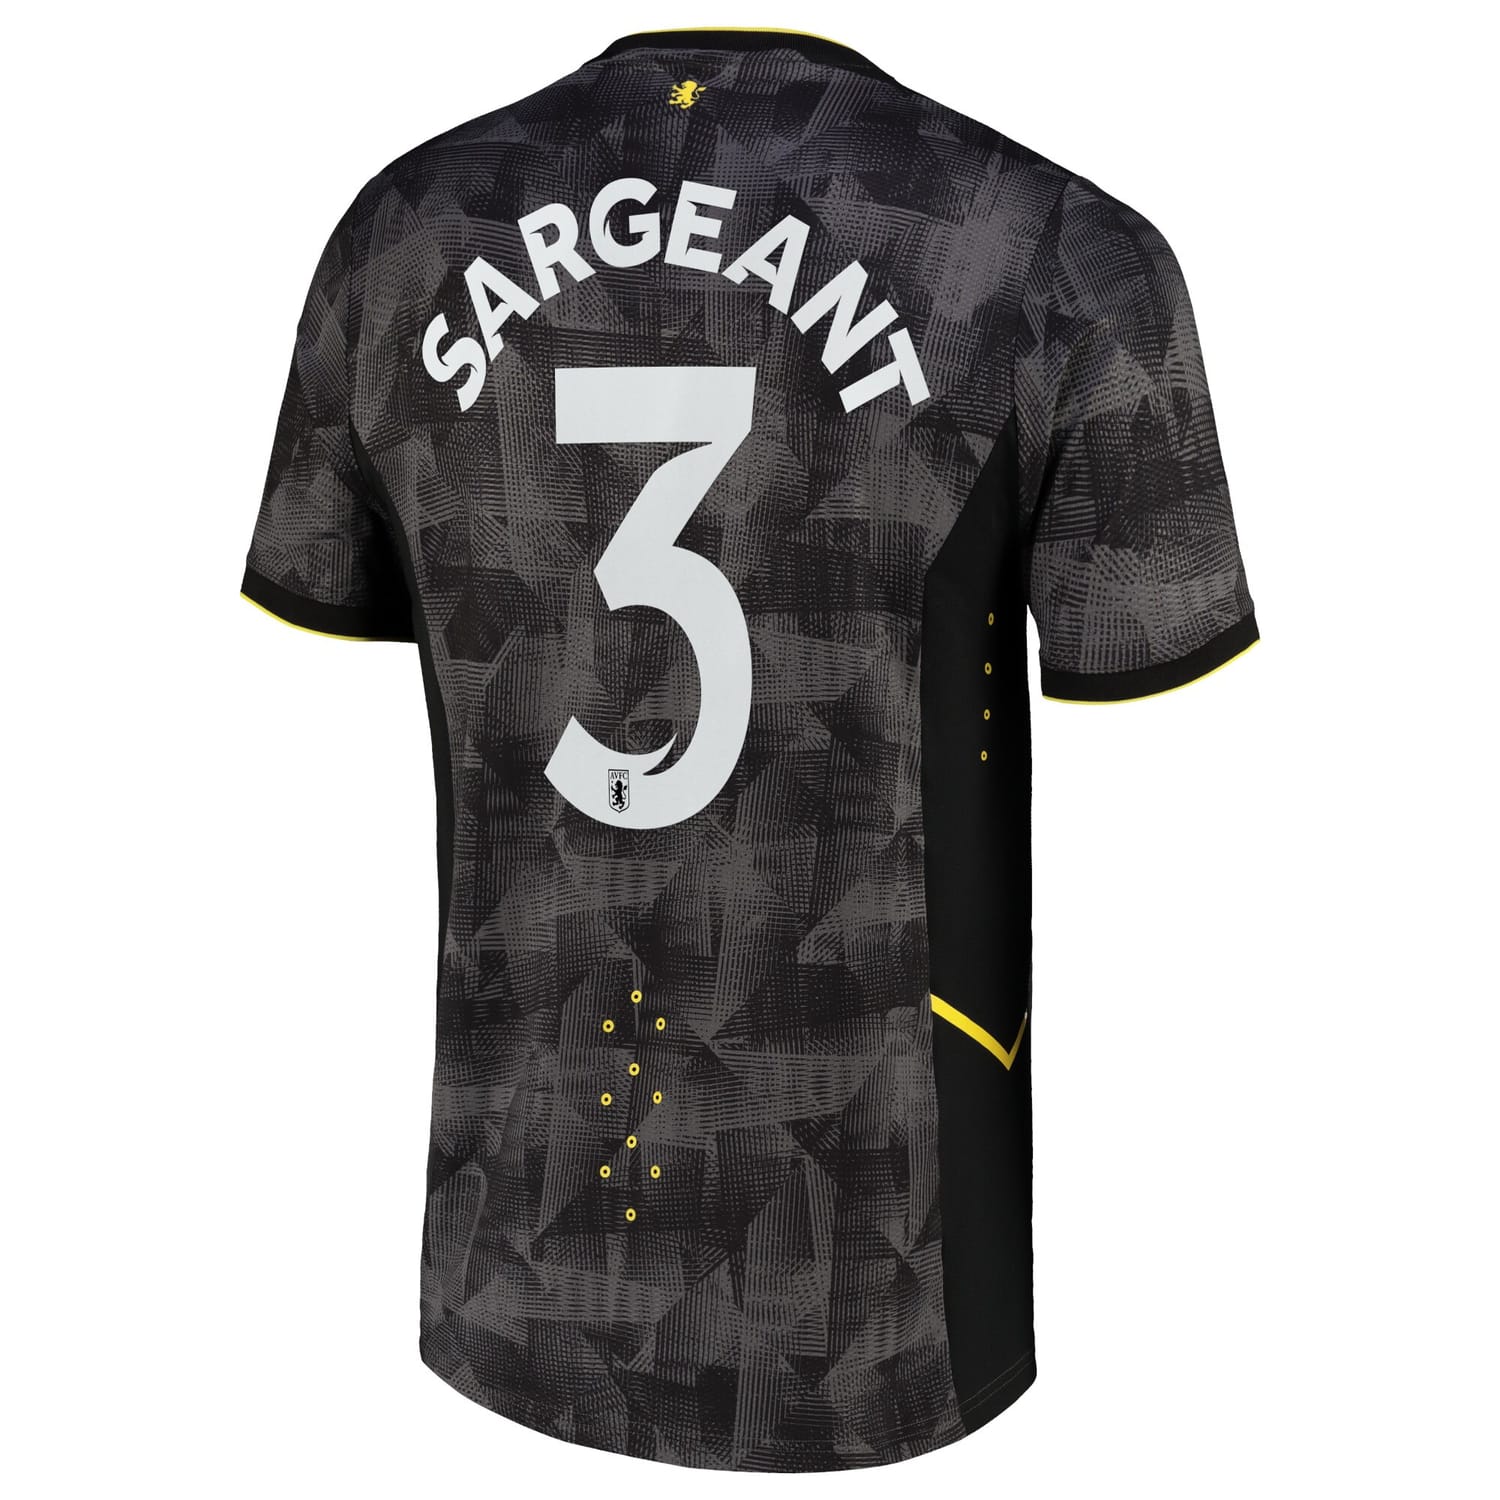 Premier League Aston Villa Third Cup Jersey Shirt 2022-23 player Meaghan Sargeant 3 printing for Men